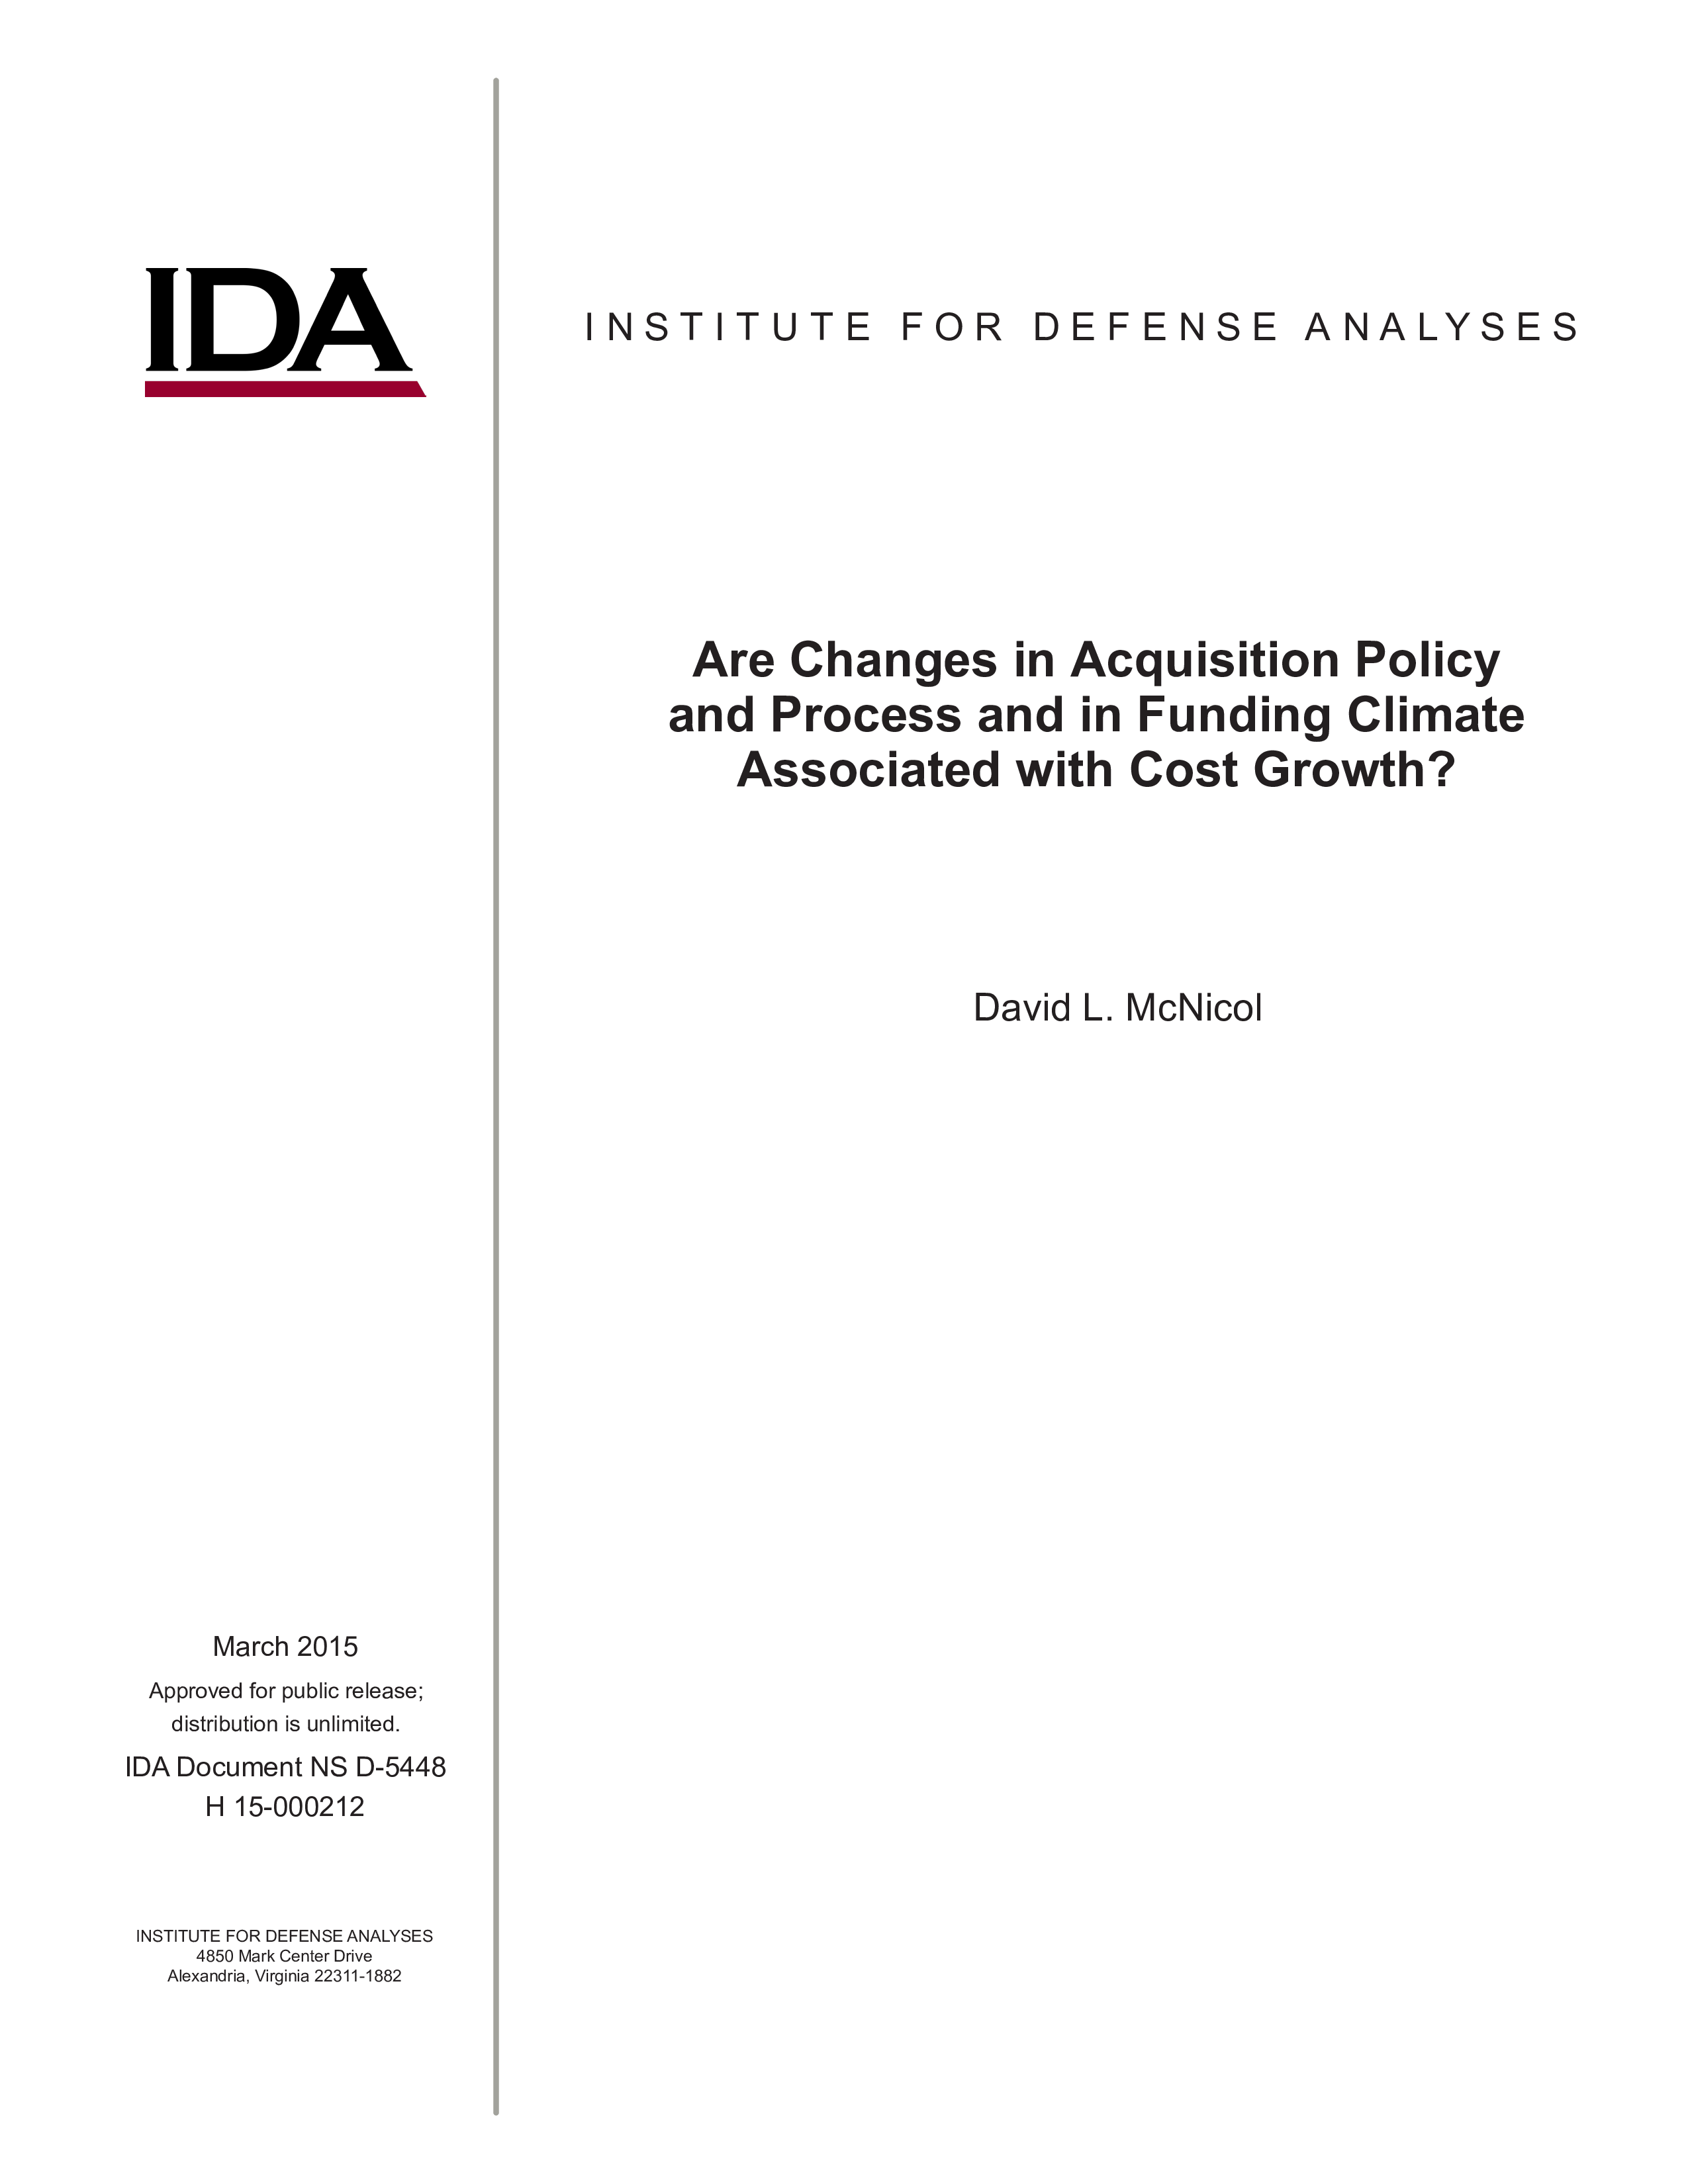 Are Changes in Acquisition Policy and Process and in Funding Climate Associated with Cost Growth?